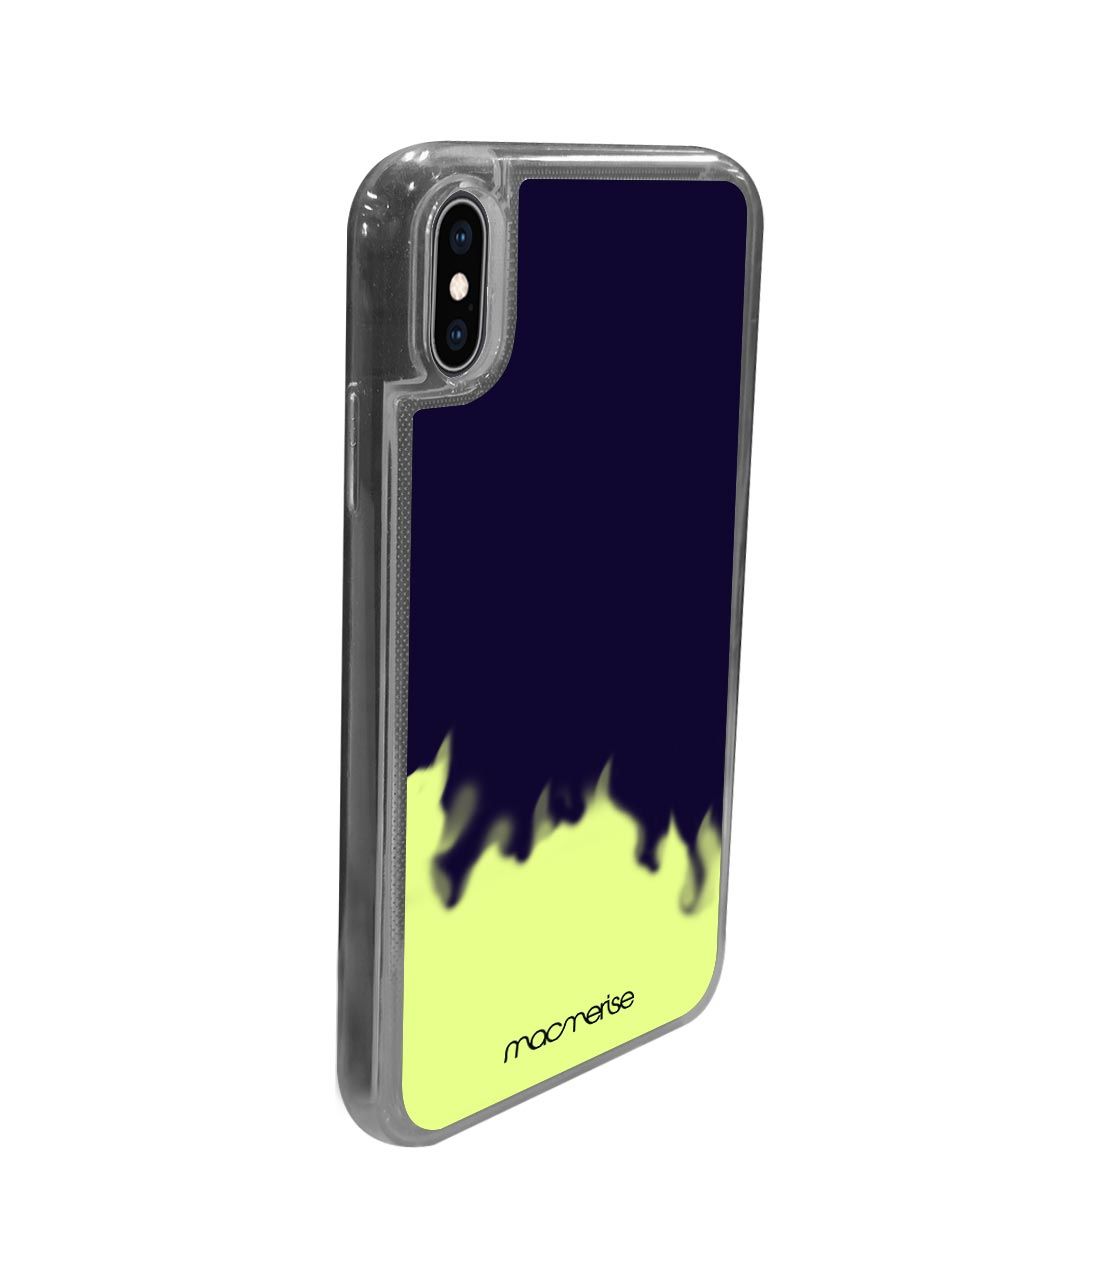 Neon Sand Blue - Neon Sand Phone Case for iPhone XS Max